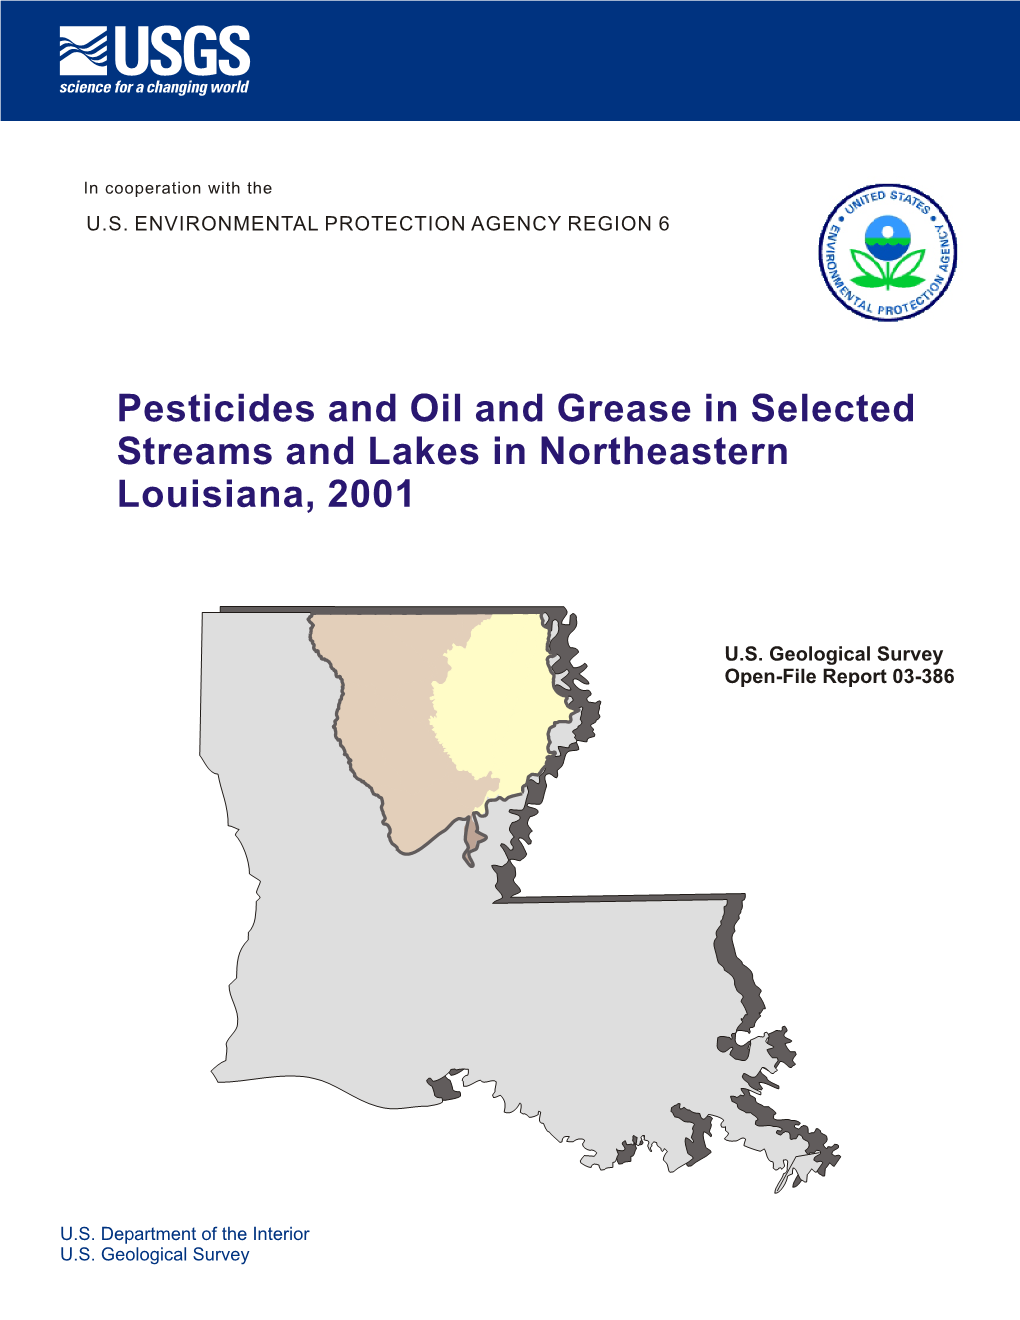 Pesticides and Oil and Grease in Selected Streams and Lakes in Northeastern Louisiana, 2001